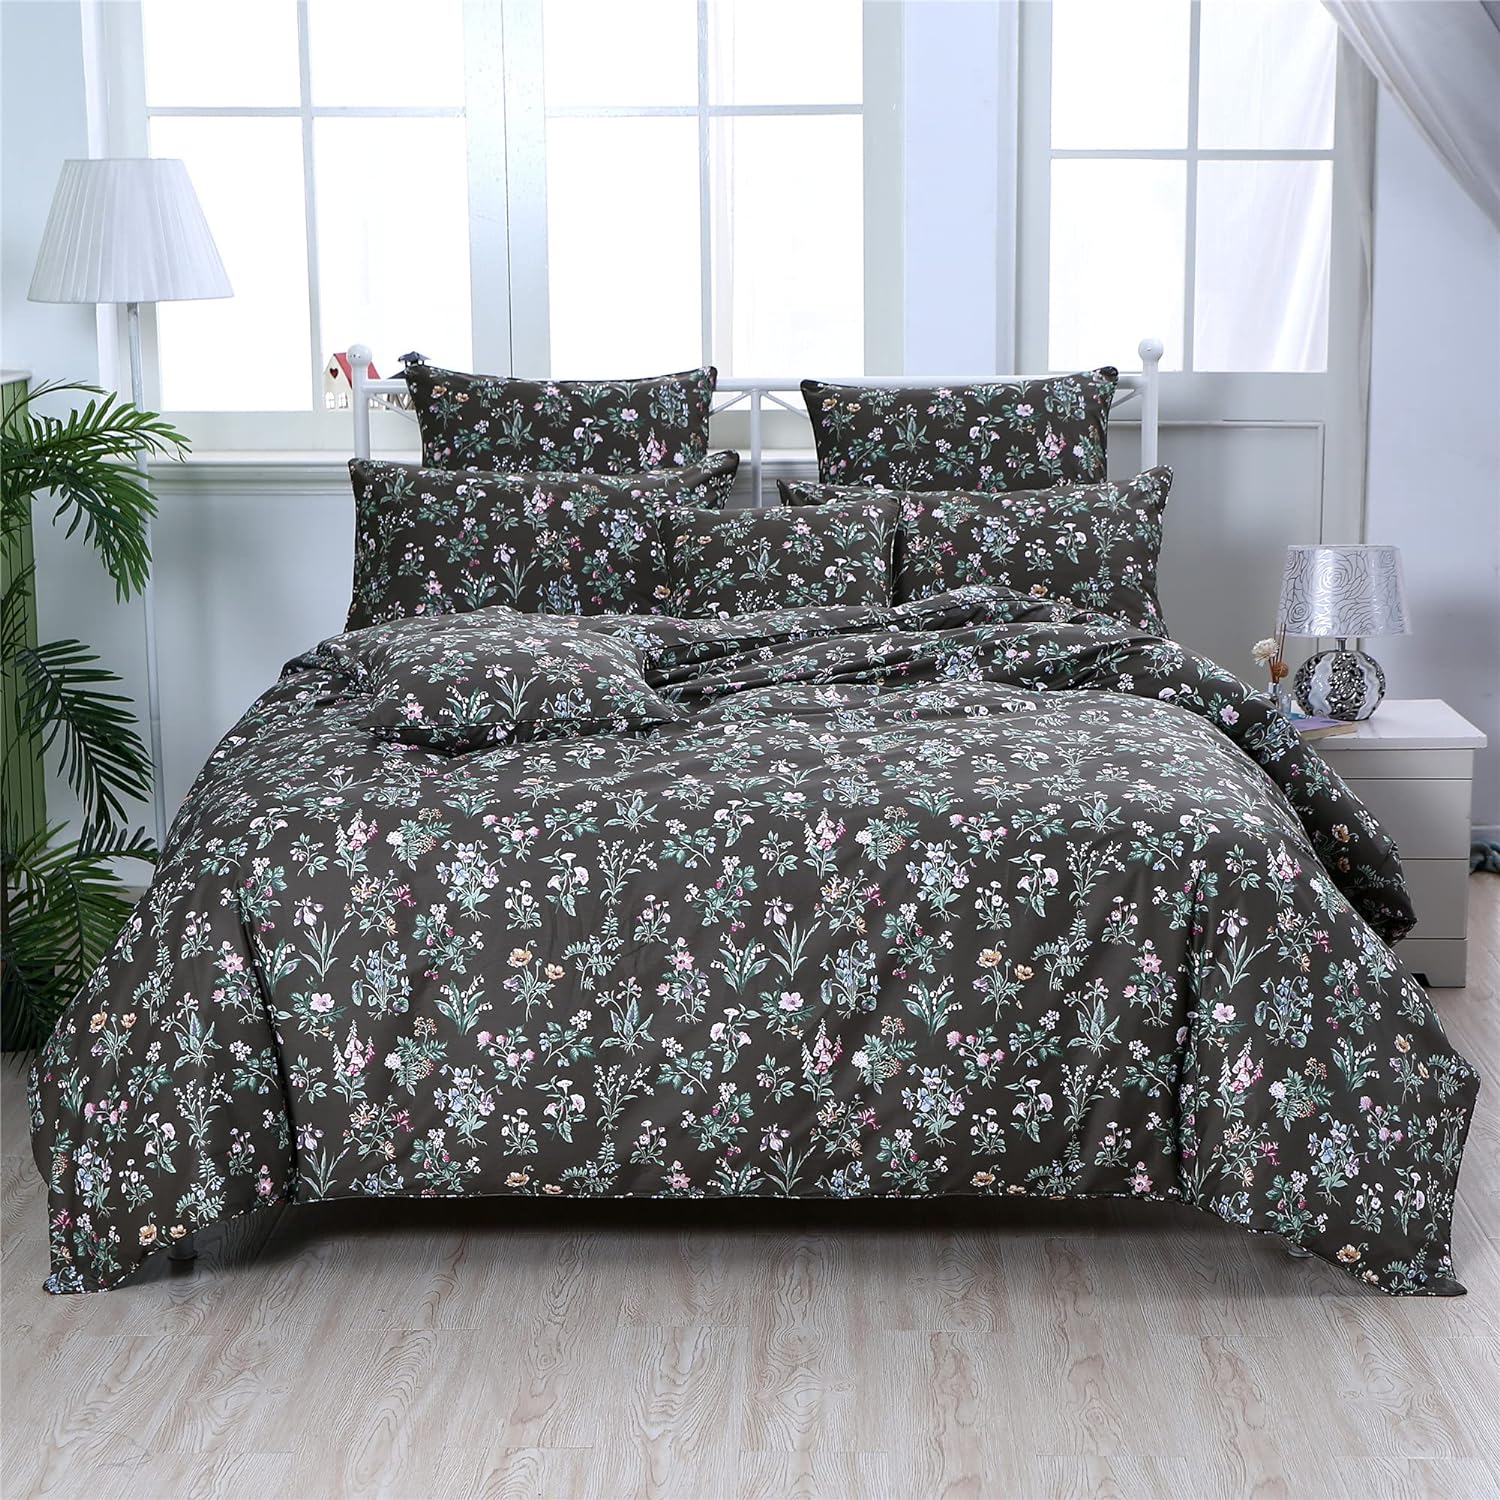 FADFAY Shabby Floral Duvet Cover Set Queen Elegant and Vintage Farmhouse Bedding Olive Green Botanical Floral Bedding 100% Cotton Ultra Soft Comforter Cover Set with Zipper Closure 3Pcs, Queen Size